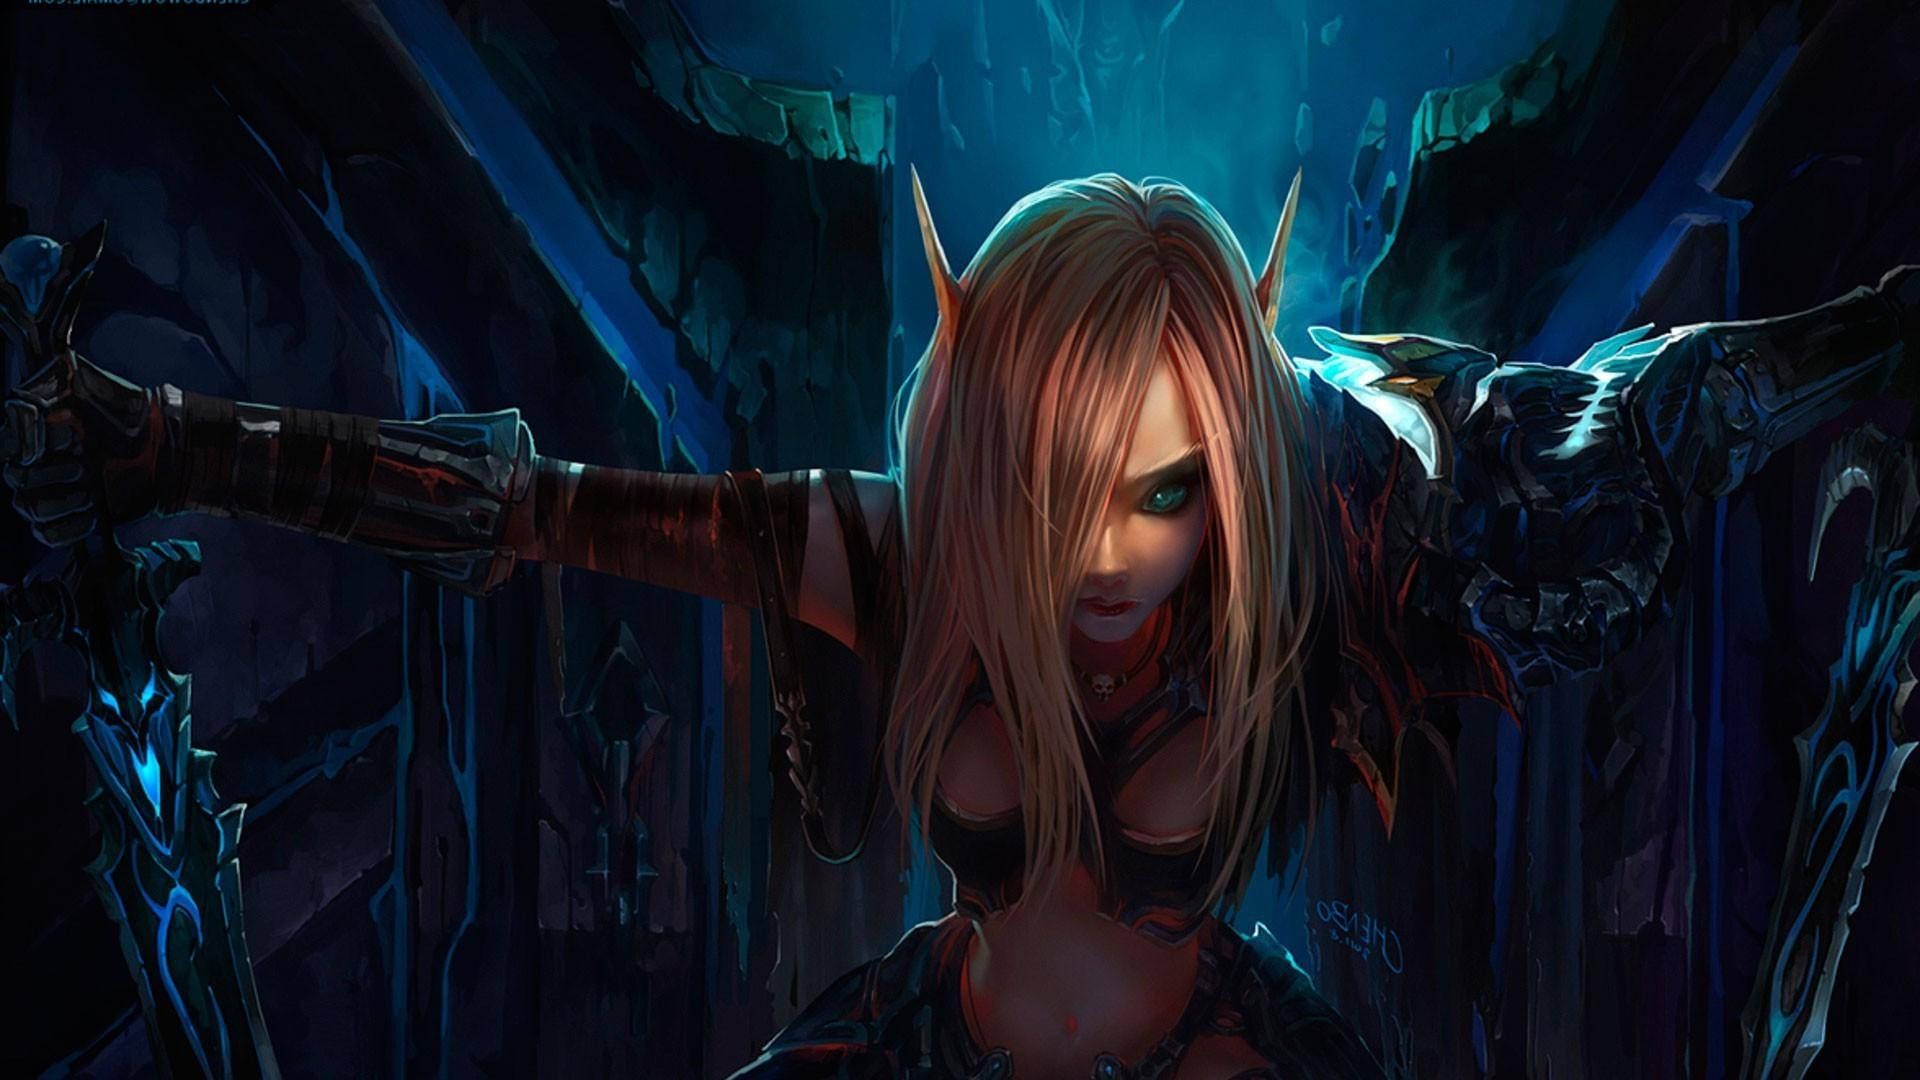 1920x1080 wallpaper of a beautiful girl with horns from World of Warcraft - Rogue